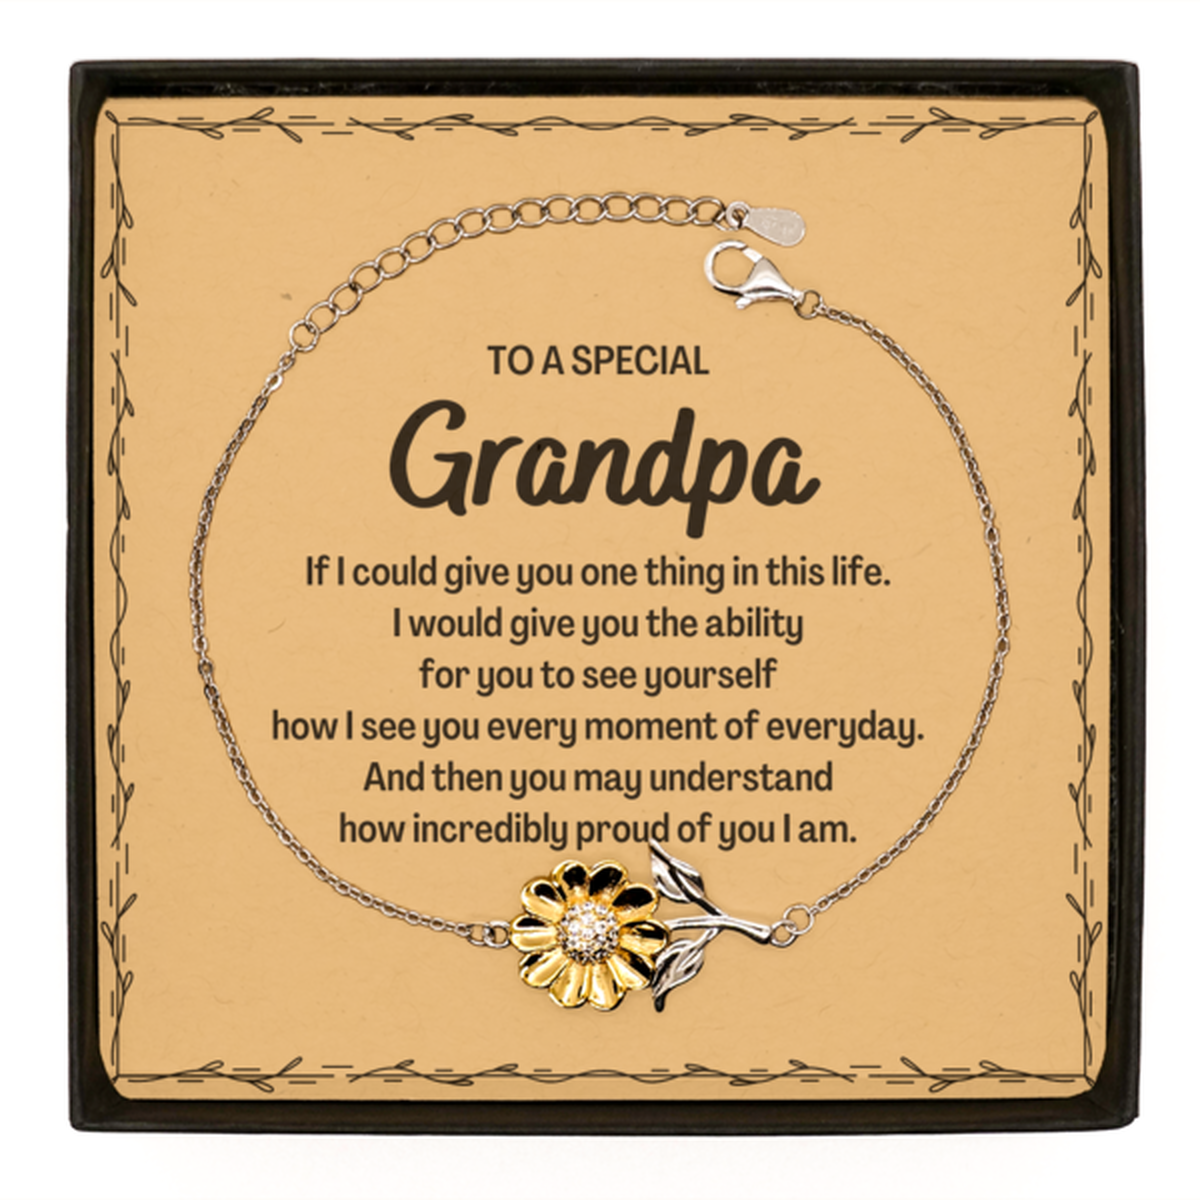 To My Grandpa Sunflower Bracelet, Gifts For Grandpa Message Card, Inspirational Gifts for Christmas Birthday, Epic Gifts for Grandpa To A Special Grandpa how incredibly proud of you I am